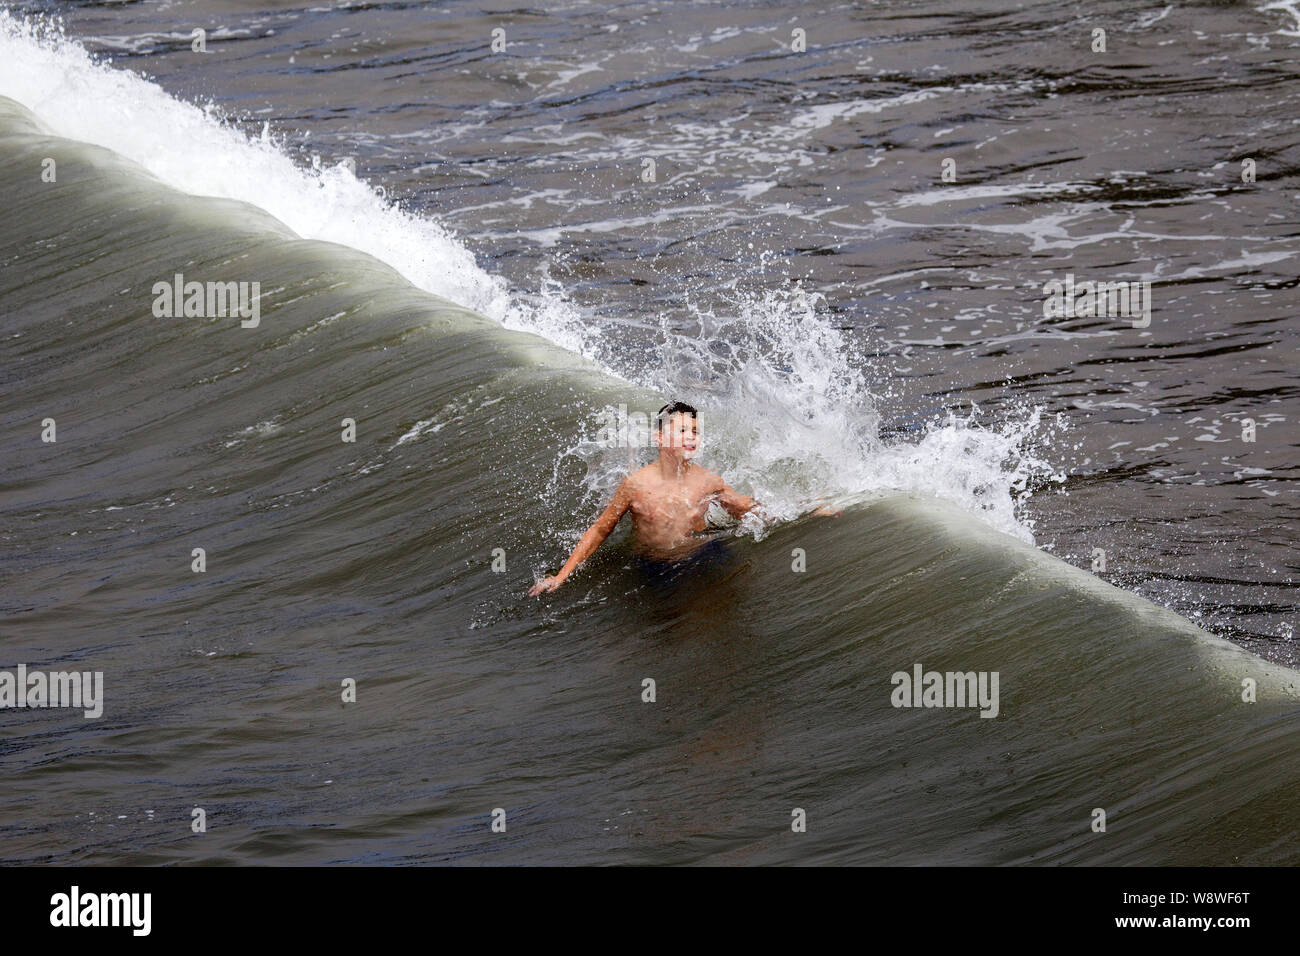 Ocean Wave Breaking on a Young Boy Stock Photo